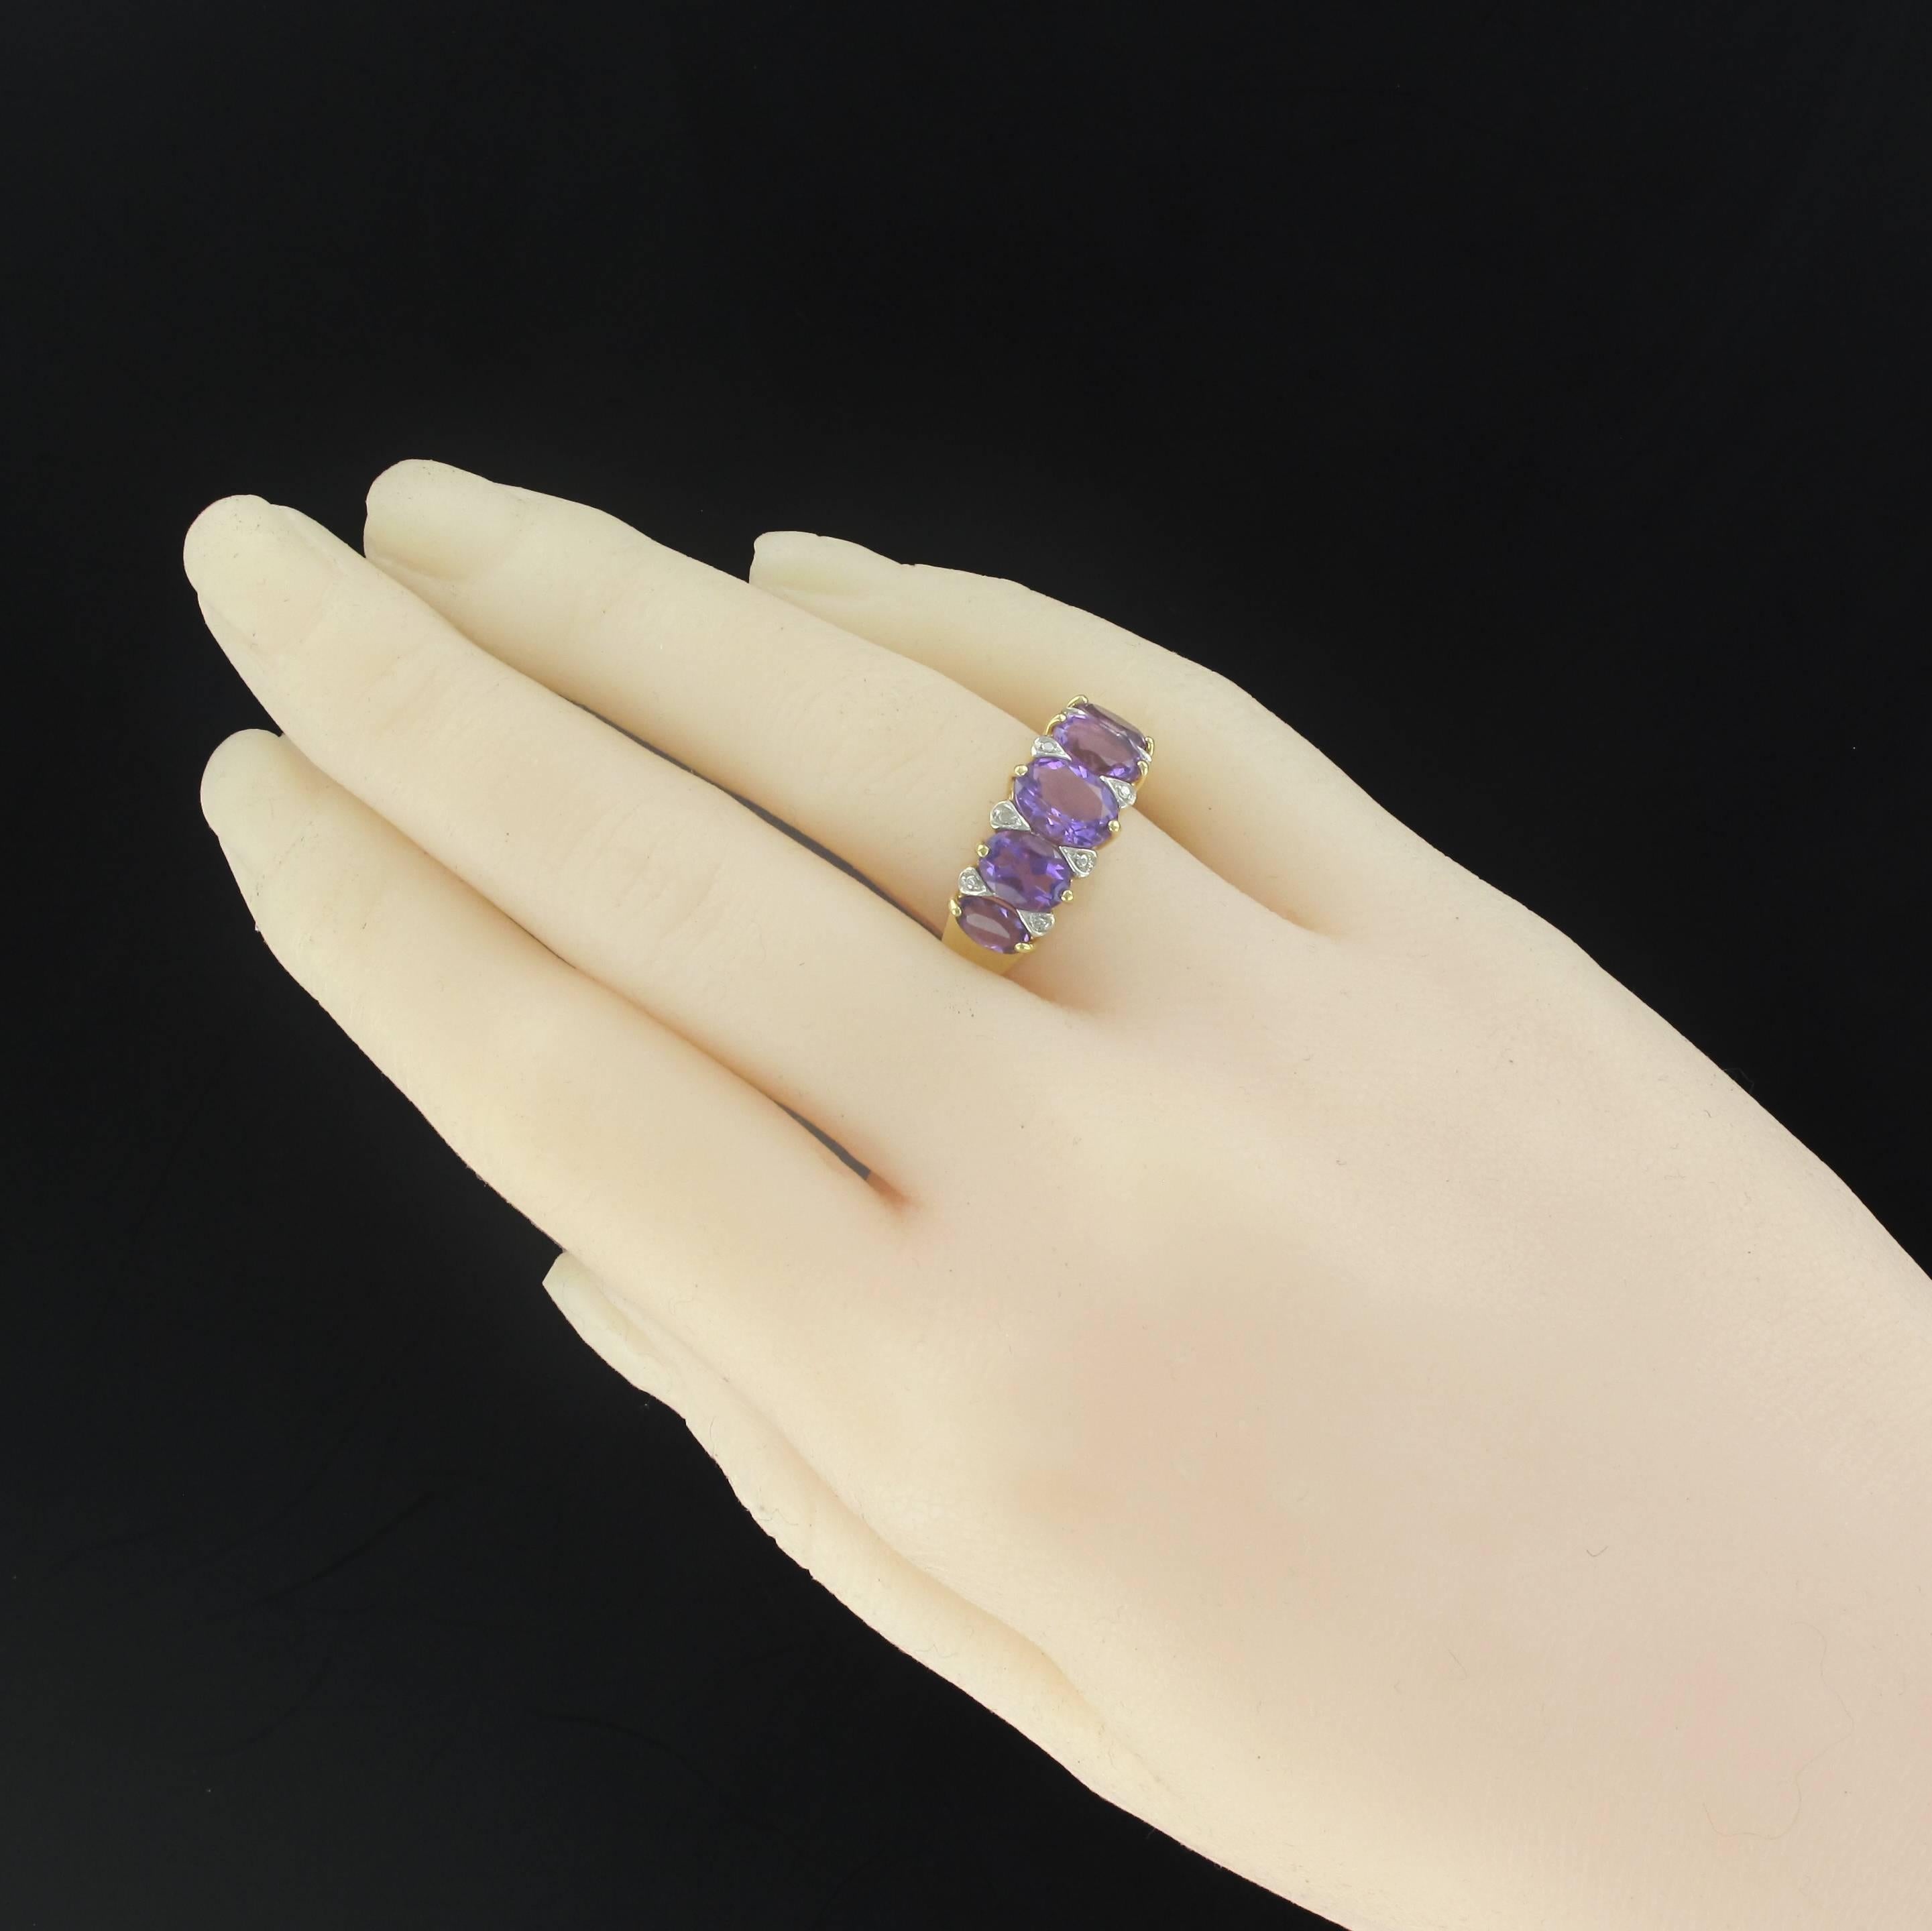 Ring in 18 carats yellow gold, eagle's head hallmark.
"Jarretière" ring, it is set with claws on its top of a drop of 5 oval amethysts separated from each other by 8 brilliant cut diamonds.
Total weight of amethysts: about 3 carats, total